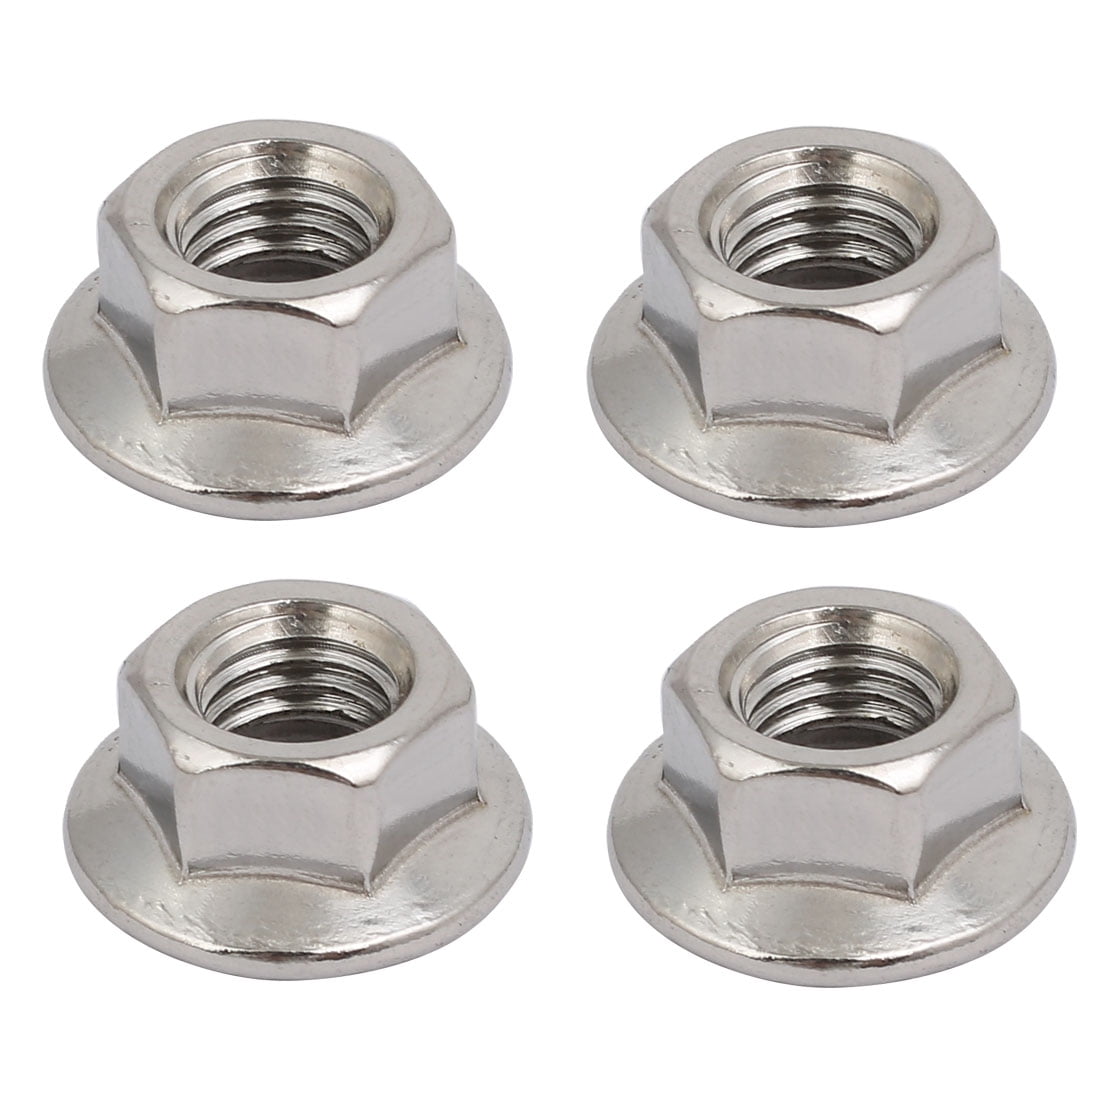 4pcs M10 x 1.25 mm Pitch Stainless Steel Right Hand Thread Hex Nut Metric 